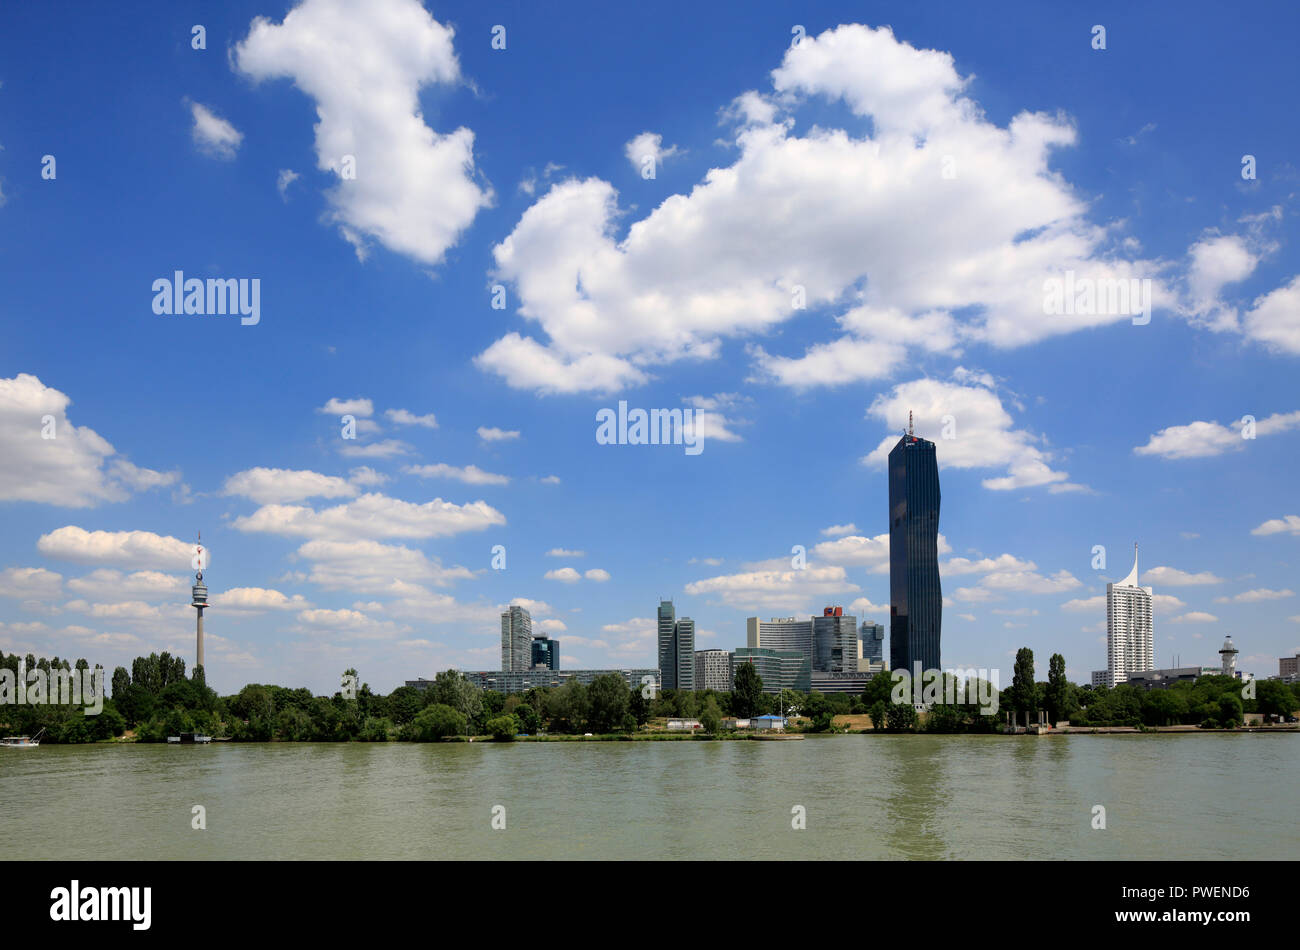 Austria, A-Vienna, Danube, Federal Capital, skyline of the Donau City, f.l.t.r. Danube Park with Donau Tower, Mischek Tower, residential tower, Saturn Tower, Commercial Tower, Ares Tower, Commercial Tower, UNO City with VIC Vienna International Centre and Austria Center Vienna, conference center, IZD Tower, Commercial Tower, DC Tower 1, Commercial Tower, skyscraper, highrise Neue Donau, apartment tower, river landscape, Danube landscape, Danube promenade, Danube bank, cumulus clouds Stock Photo